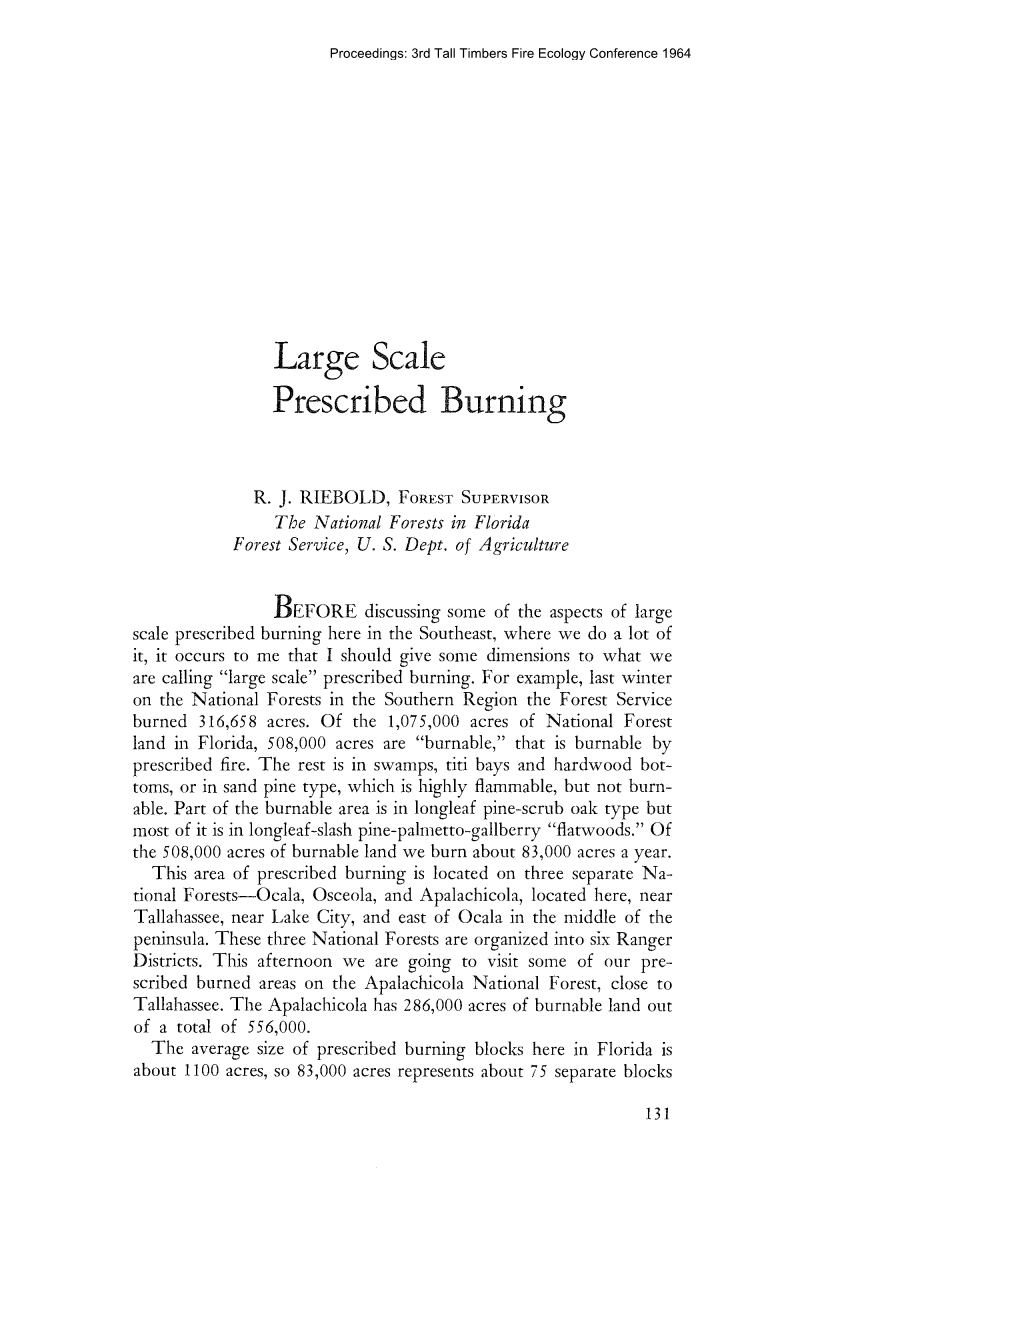 Large Scale Prescribed Burning, by R. J. Riebold , Pp